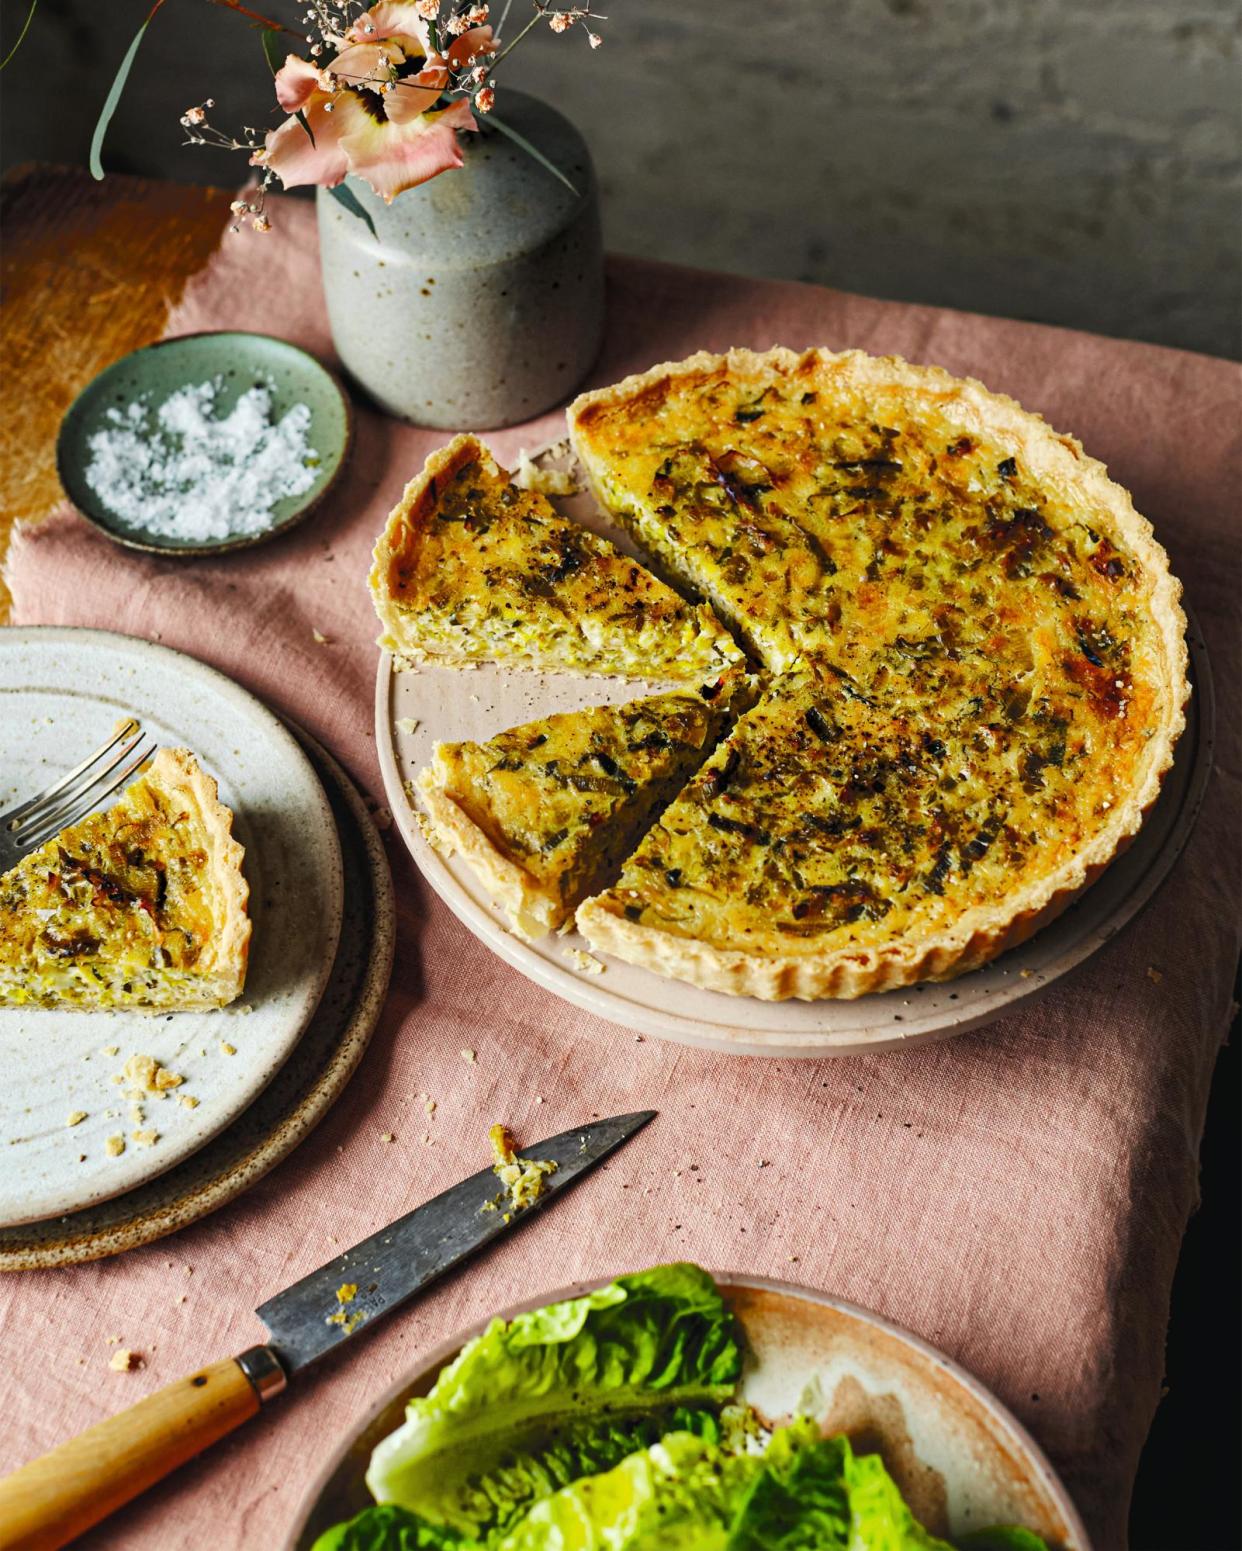 <span>From Felicity Cloake’s perfect quiche to a less exacting affair, ‘quiche can be whatever you want it to be’. </span><span>Photograph: Sam A Harris/The Guardian. Food and prop styling: Kitty Coles. Food assistant: Rosie Conroy.</span>